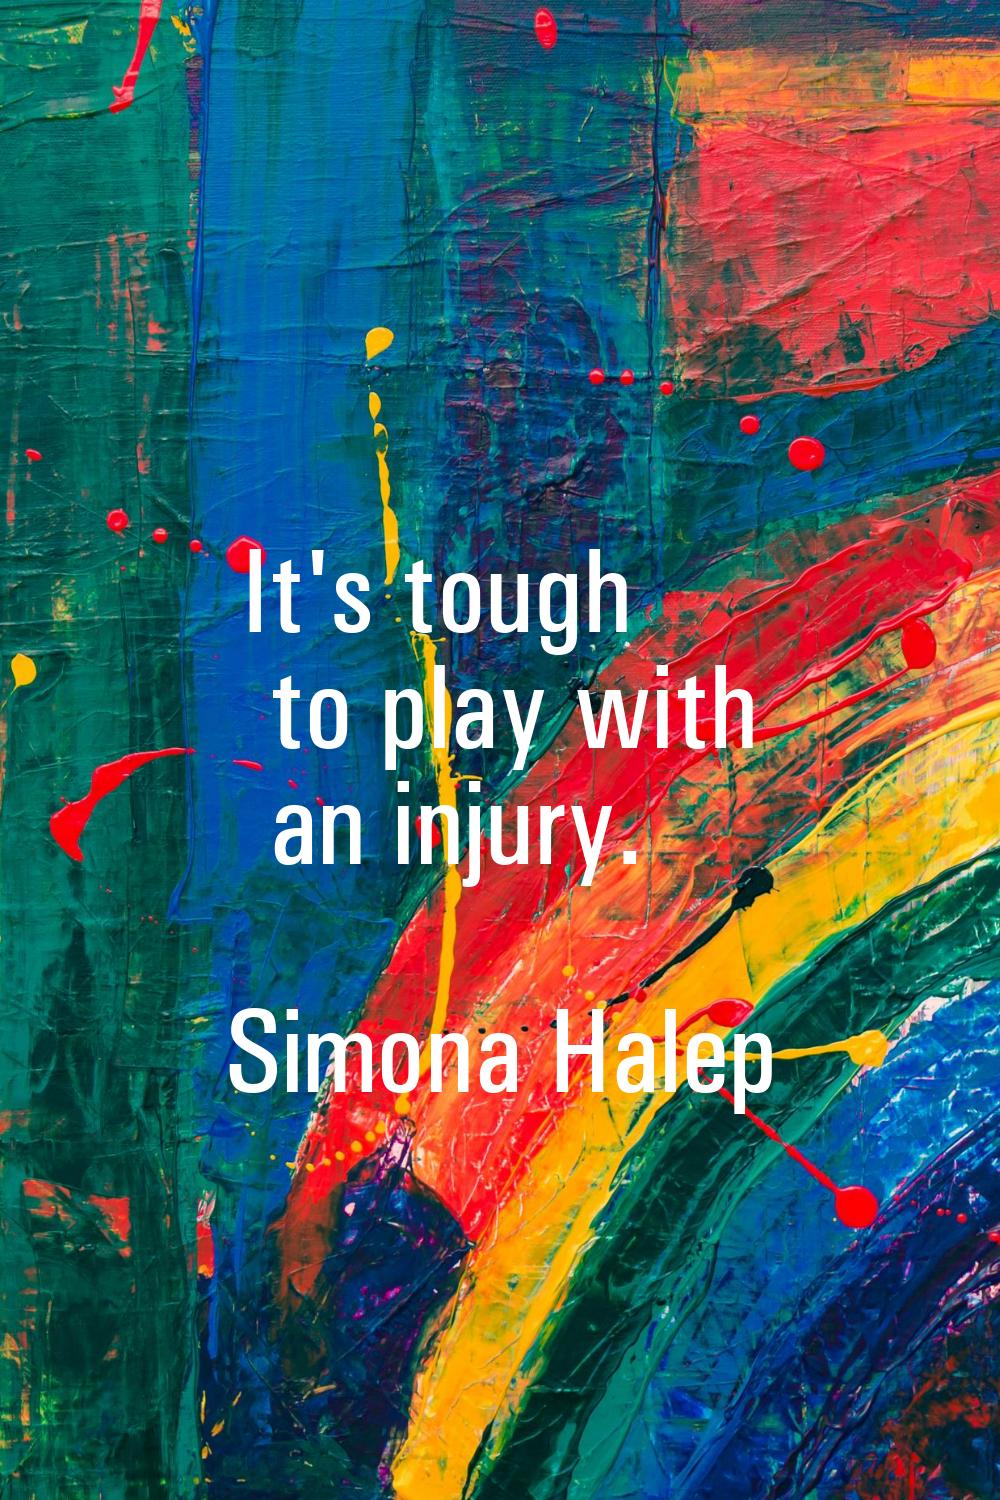 It's tough to play with an injury.